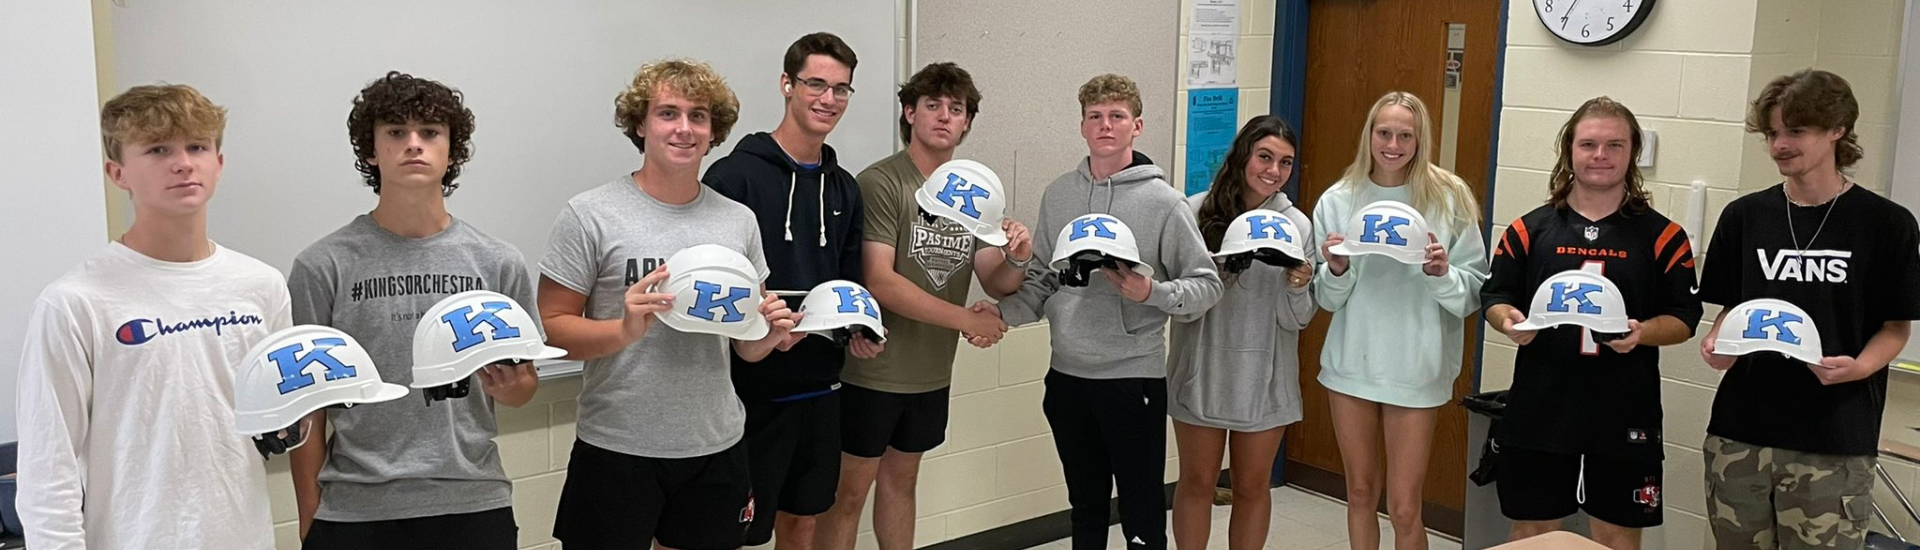 khs students with hardhats